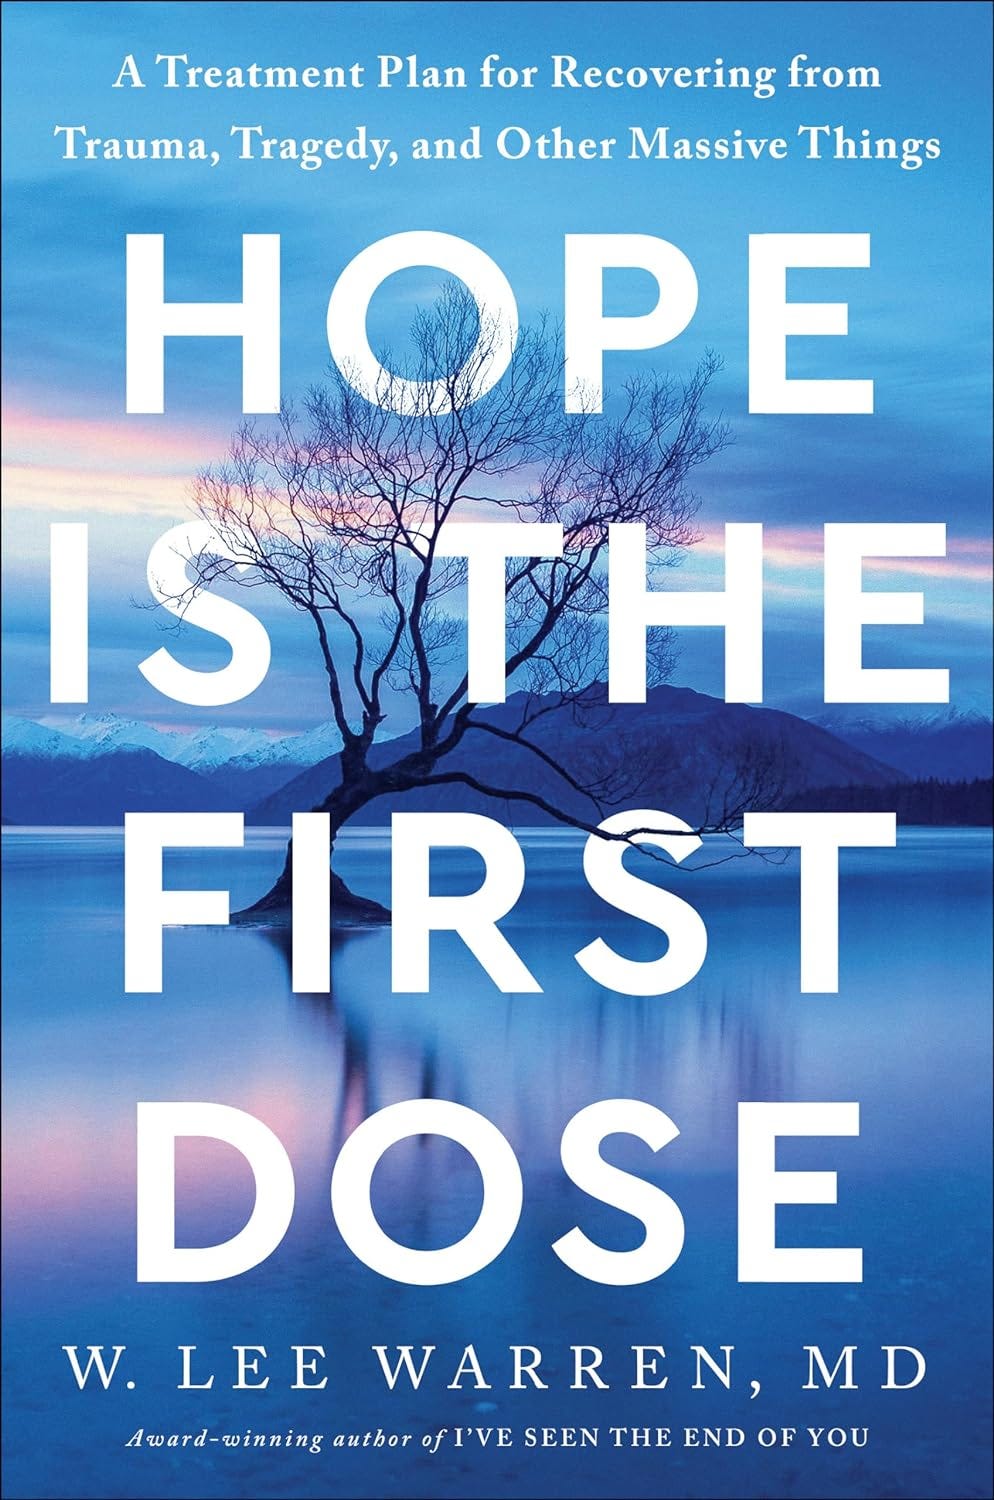 Image of the book cover for Hope Is The First Dose by Dr. Lee Warren.